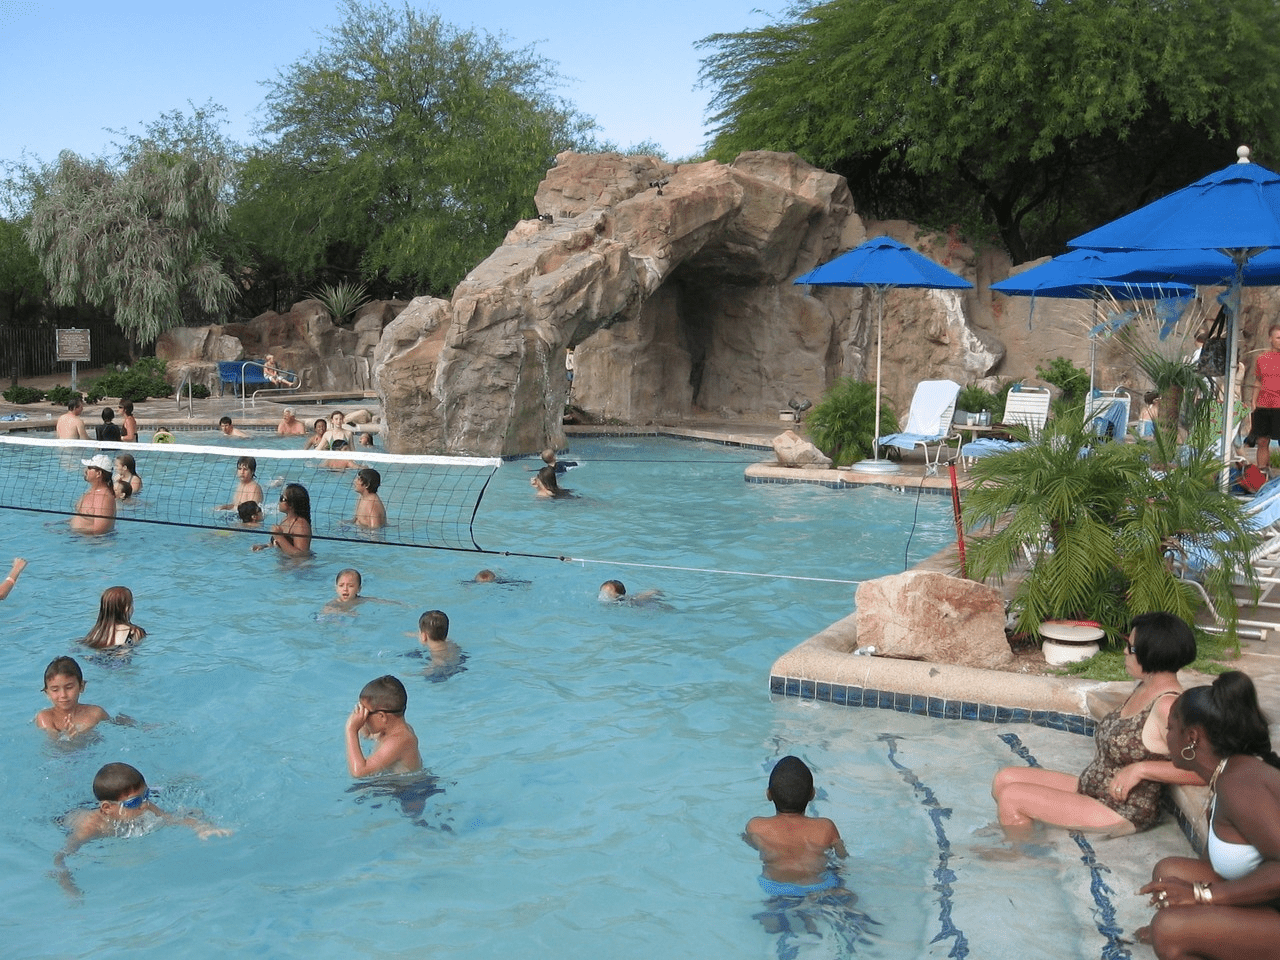 An pool volleyball match